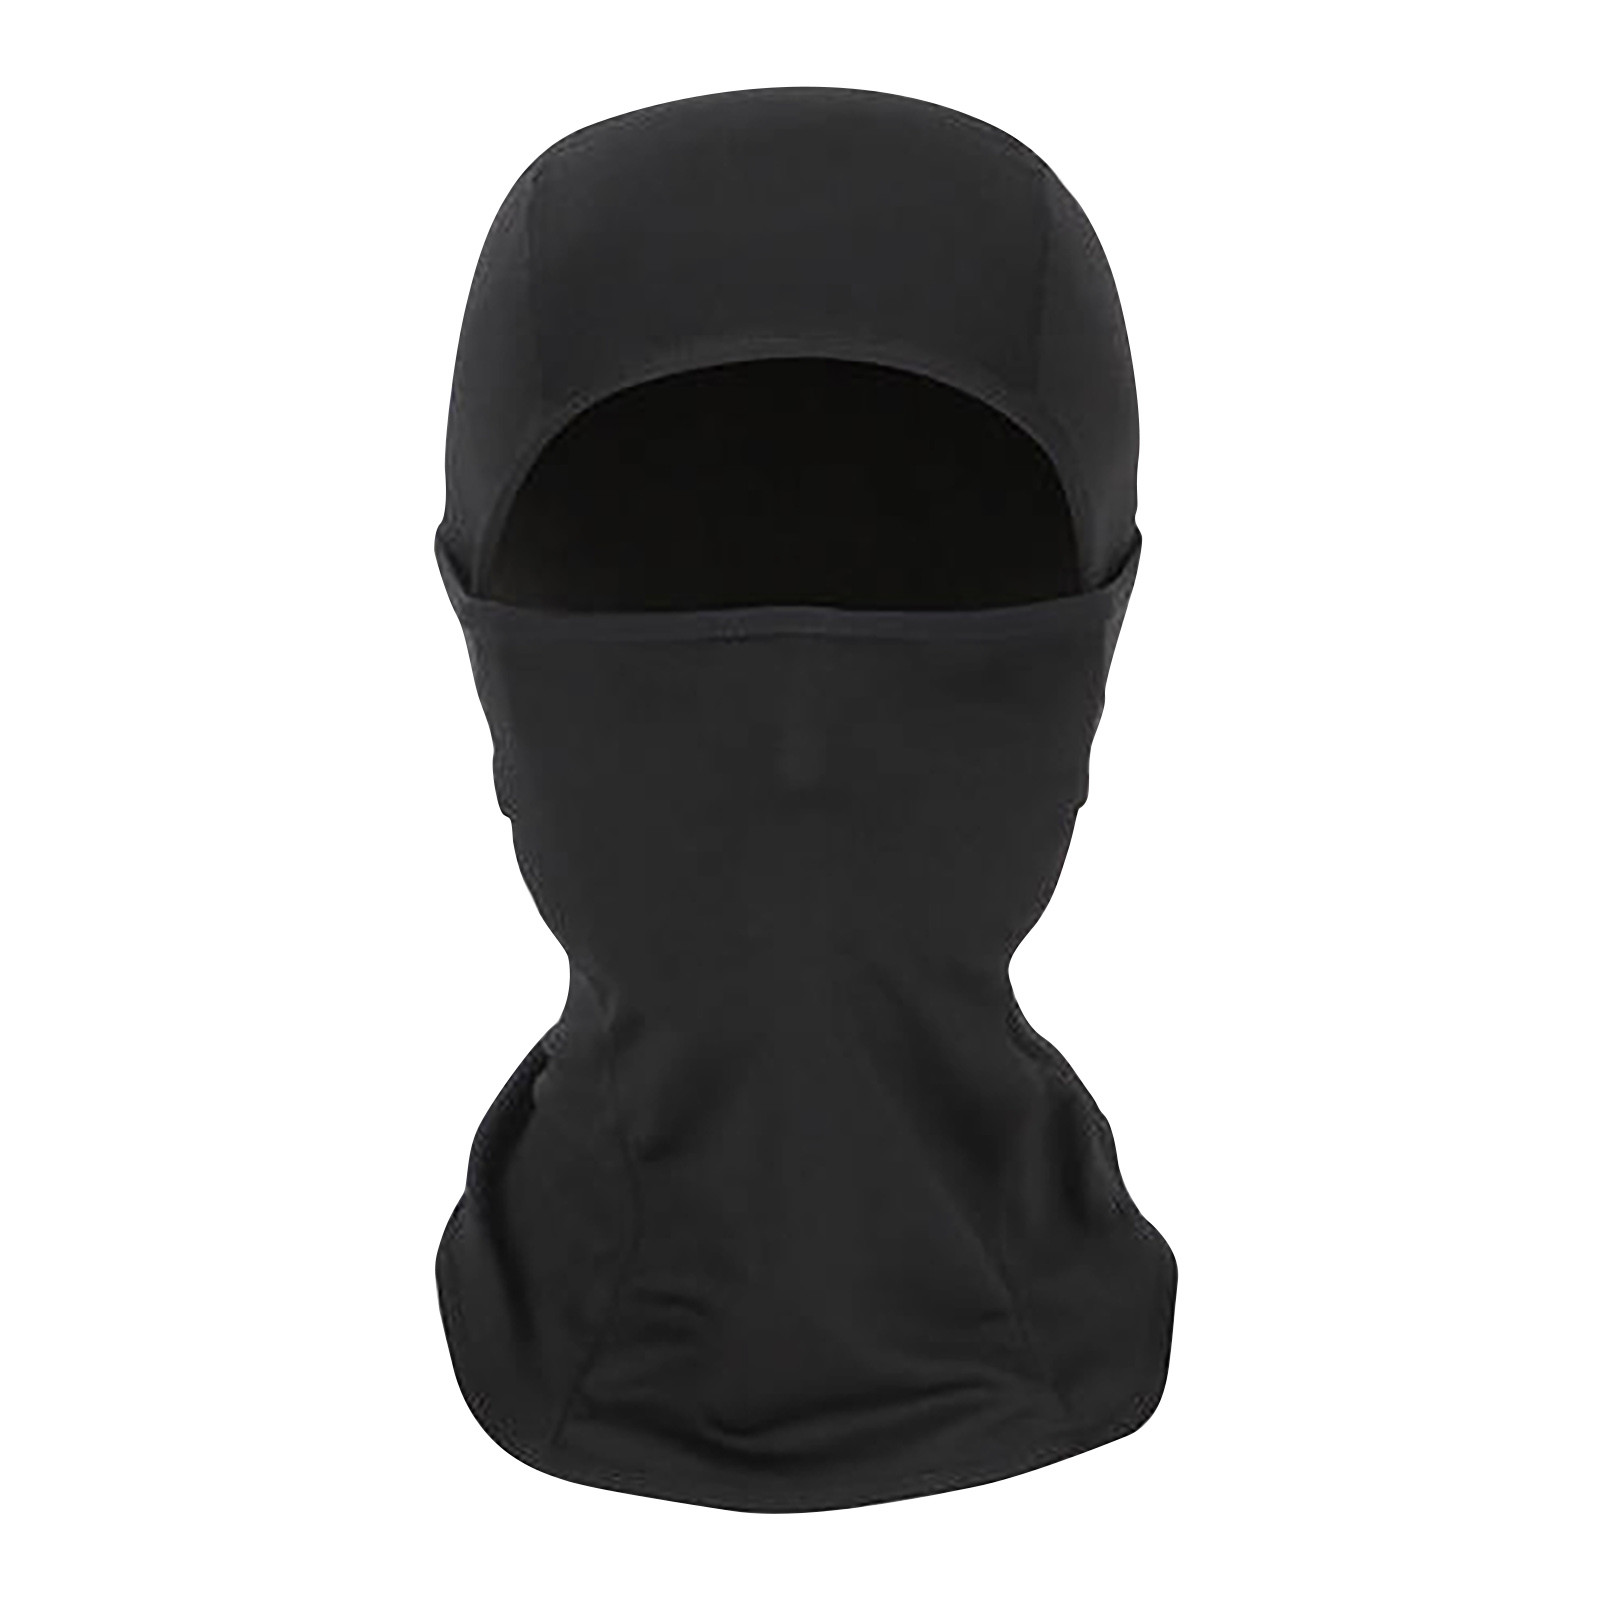 Luxalzxs Cold Weather Balaclava Ski Mask, Water Resistant and Windproof ...